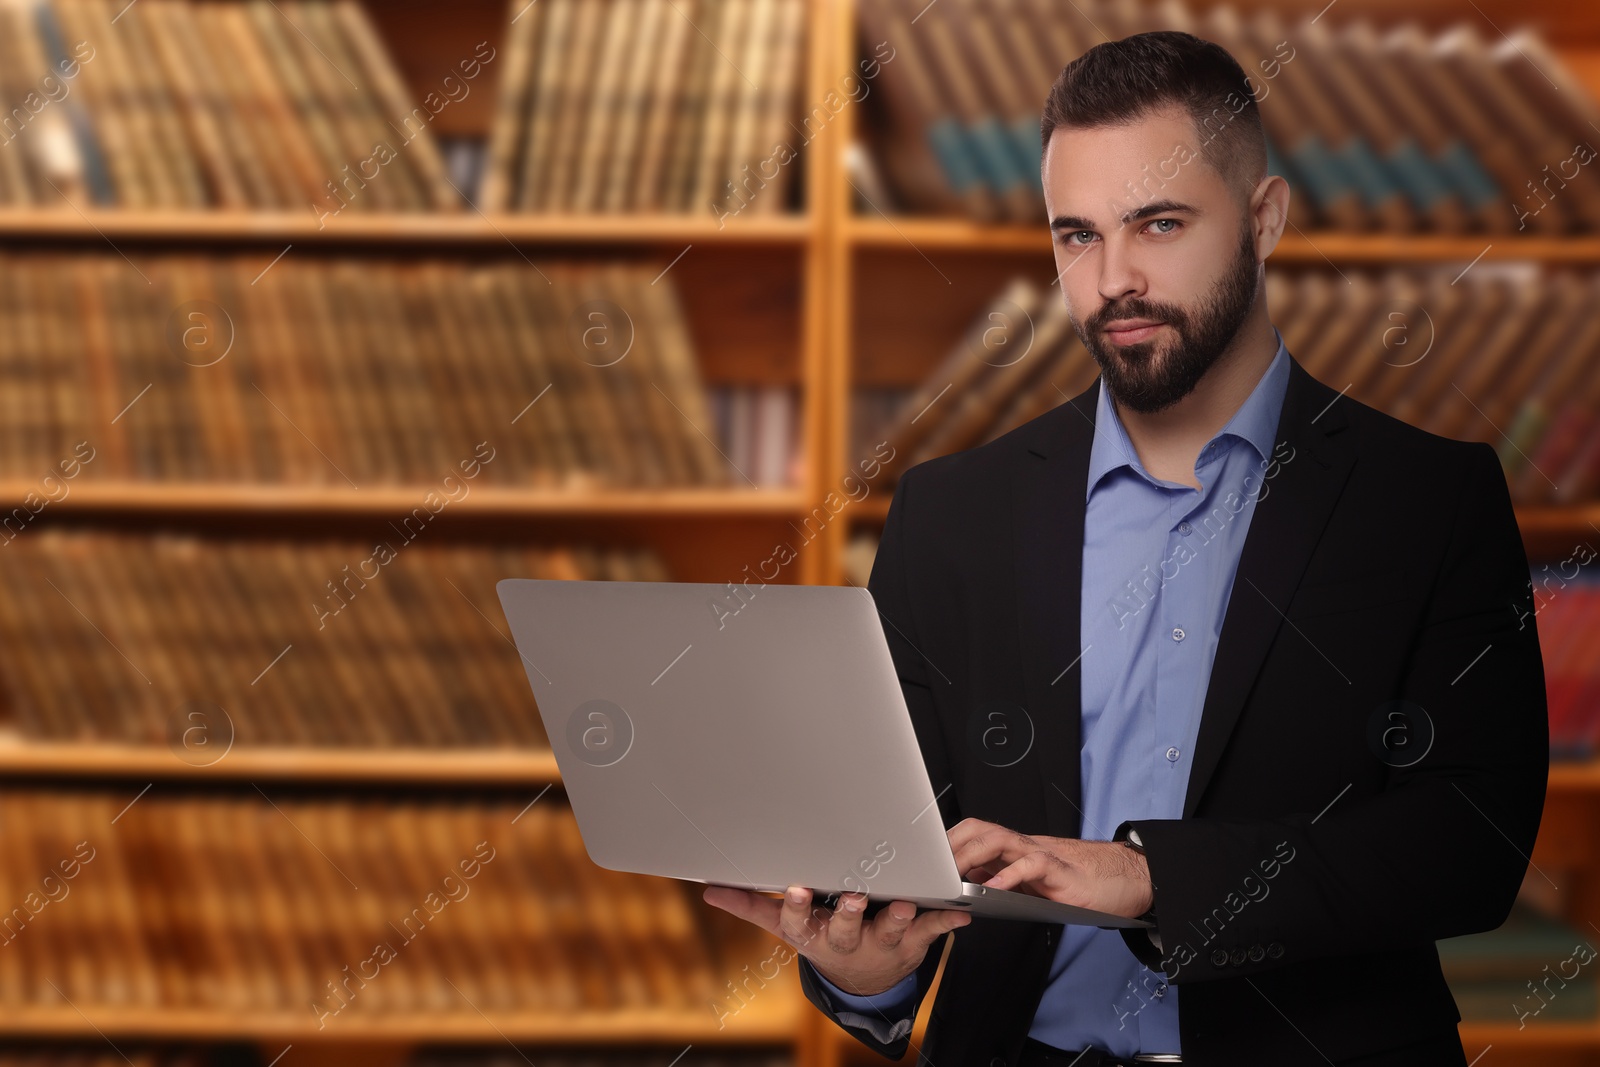 Image of Lawyer with laptop against shelves with books, space for text